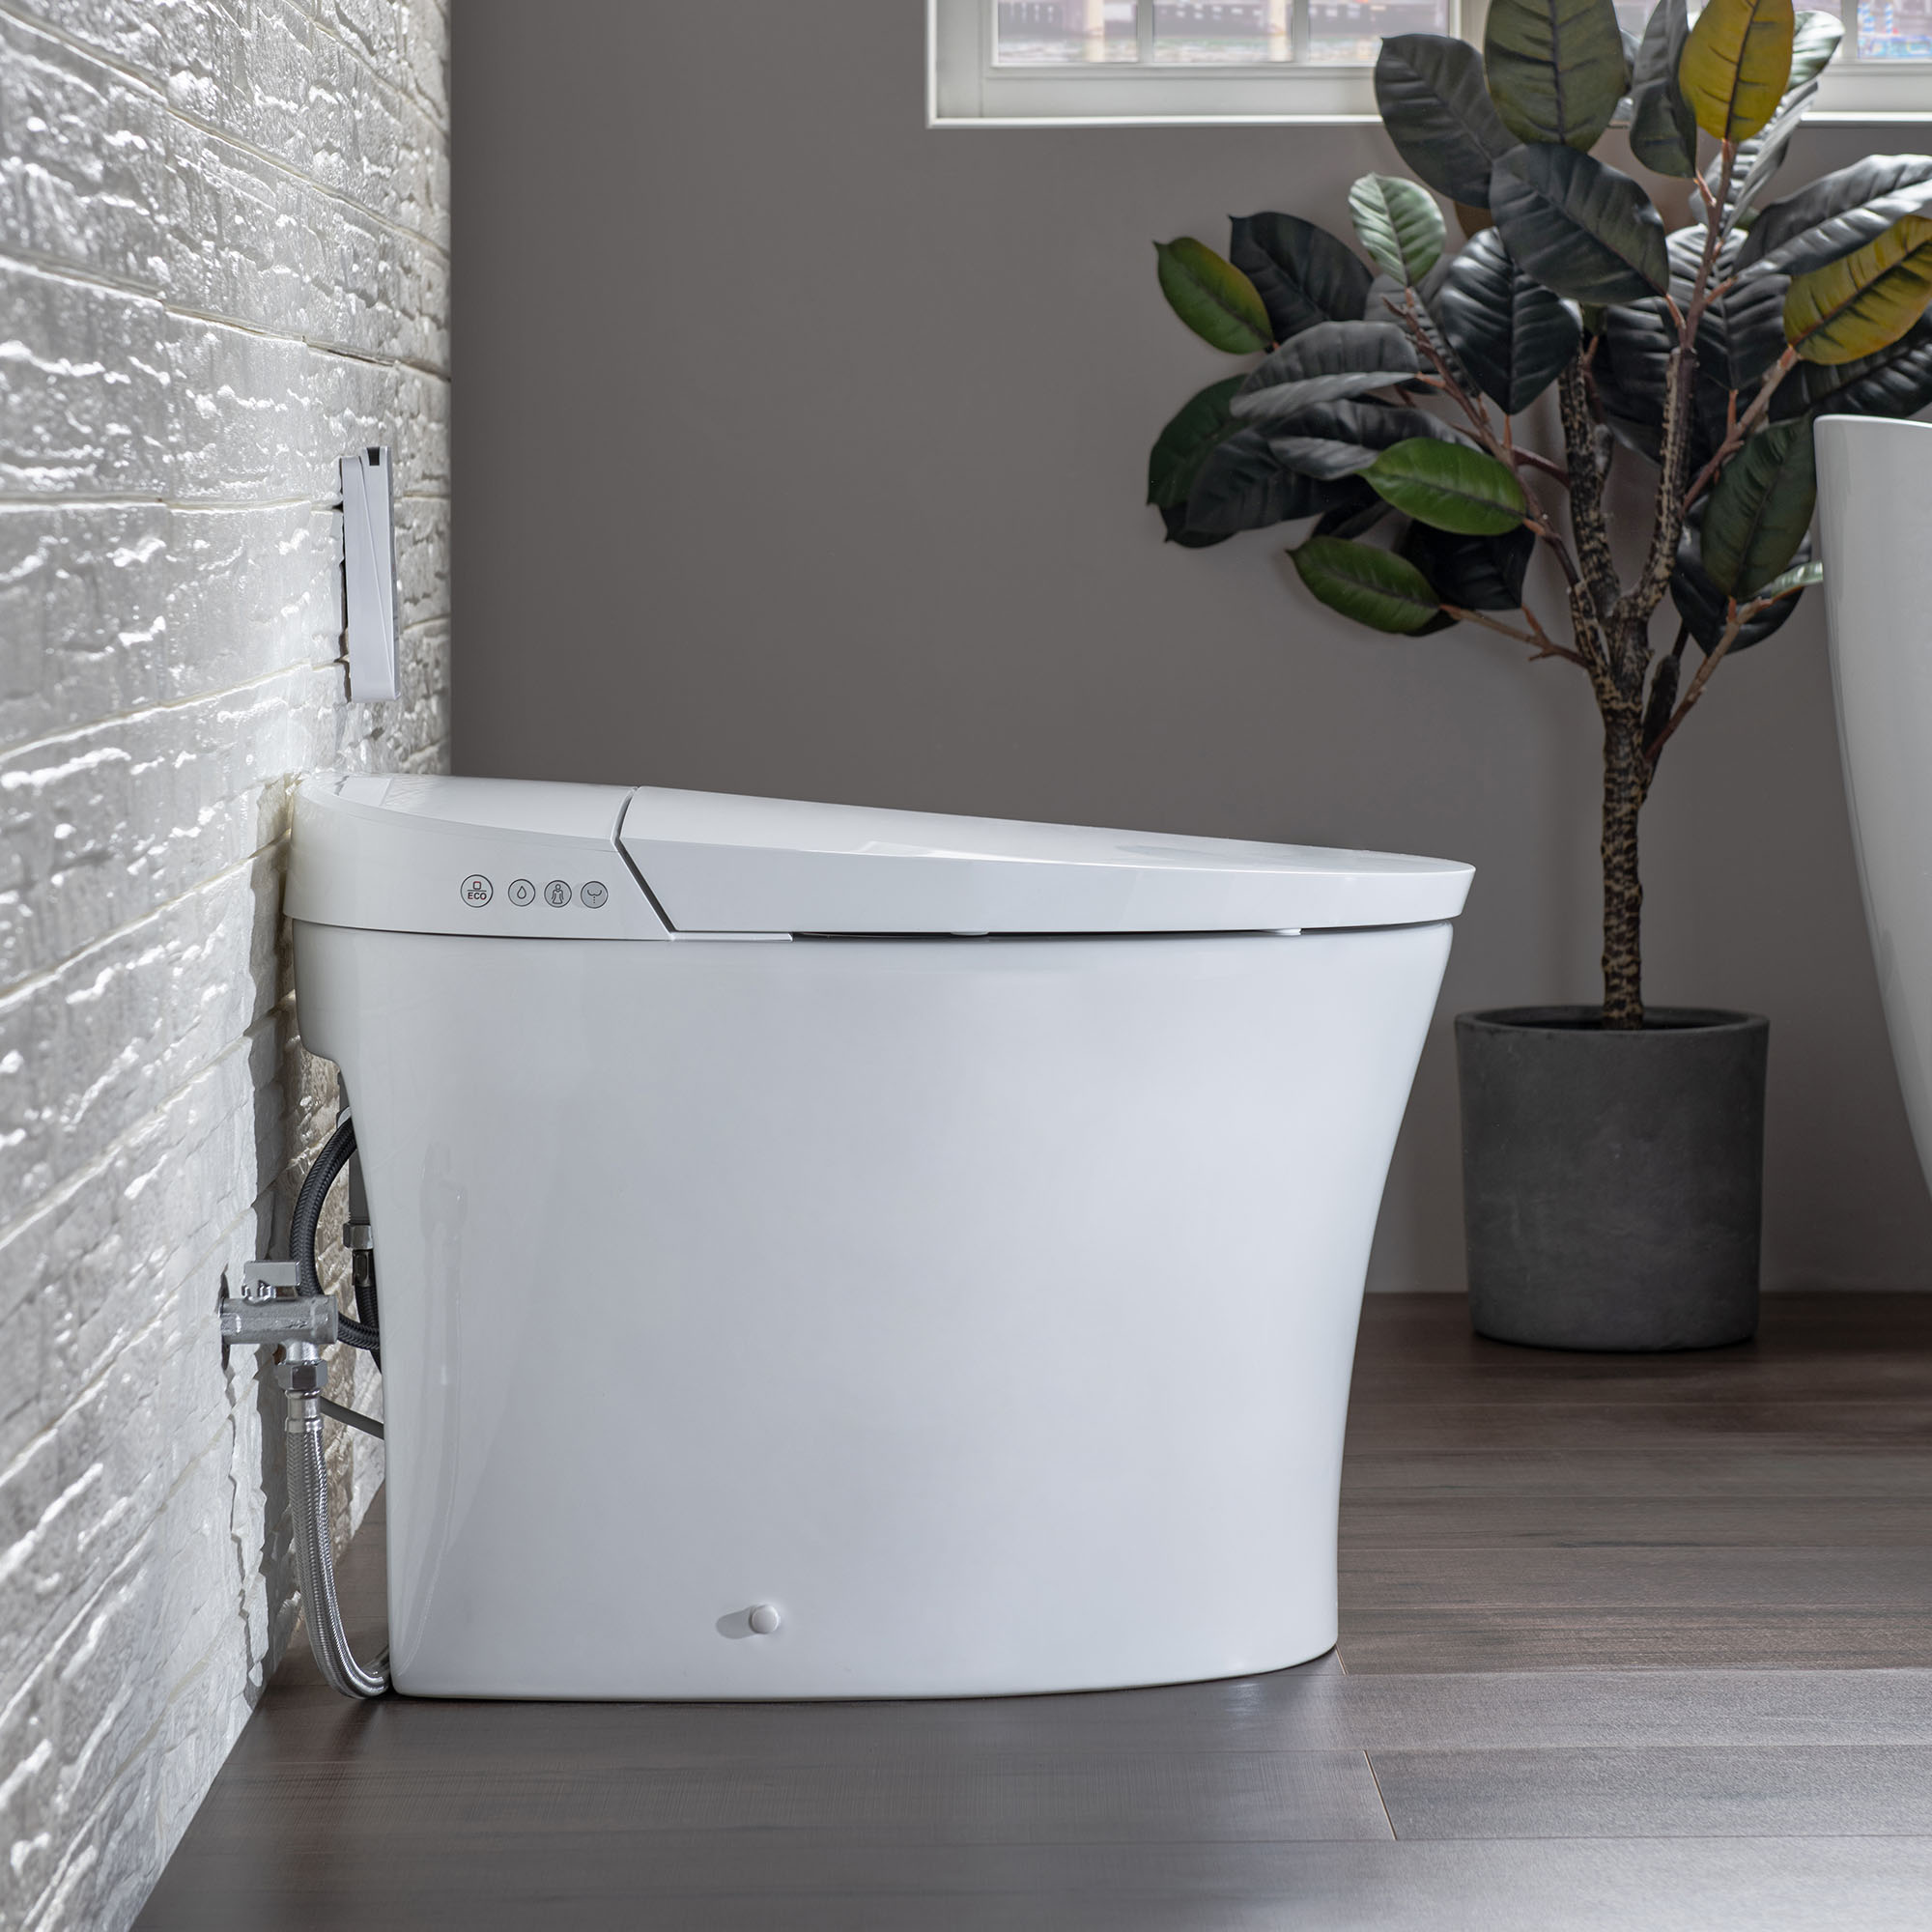  WOODBRIDGE B0970S Smart Bidet Tankless Toilet Elongated One Piece Chair Height, Auto Flush, Foot Sensor Operation, Heated Seat with Integrated Multi Function Remote Control in White_12178